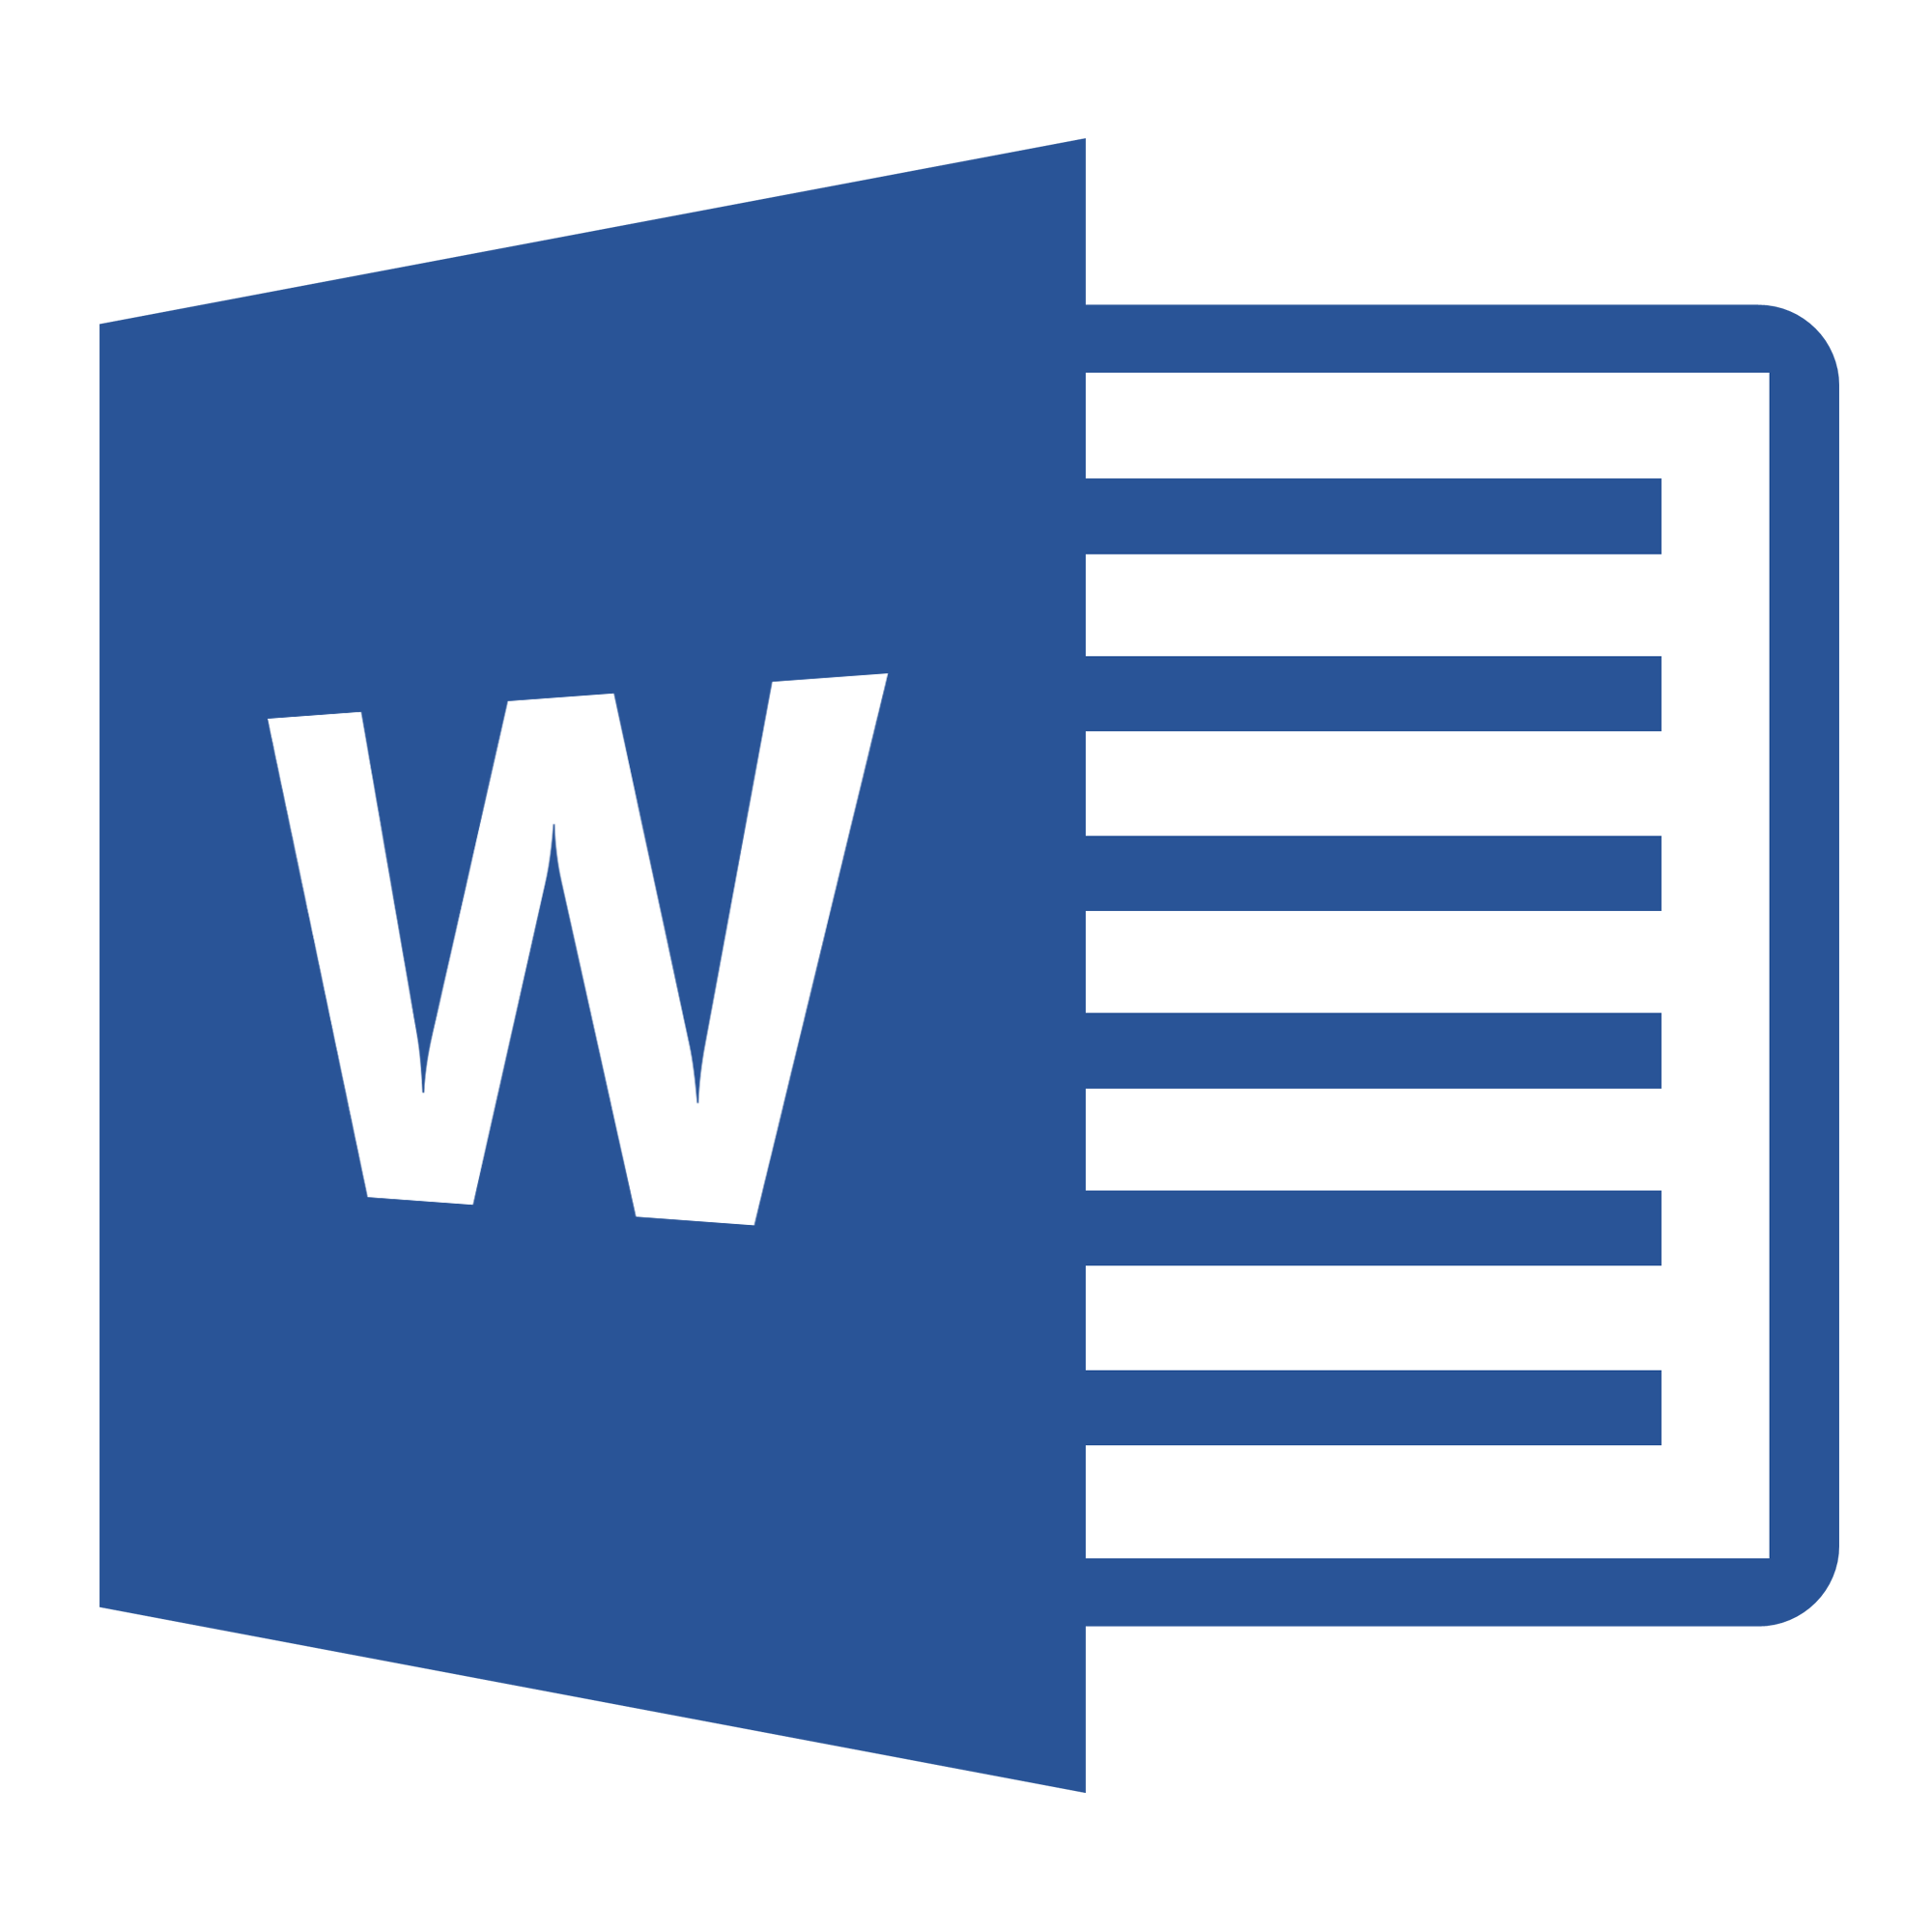 Word document download image